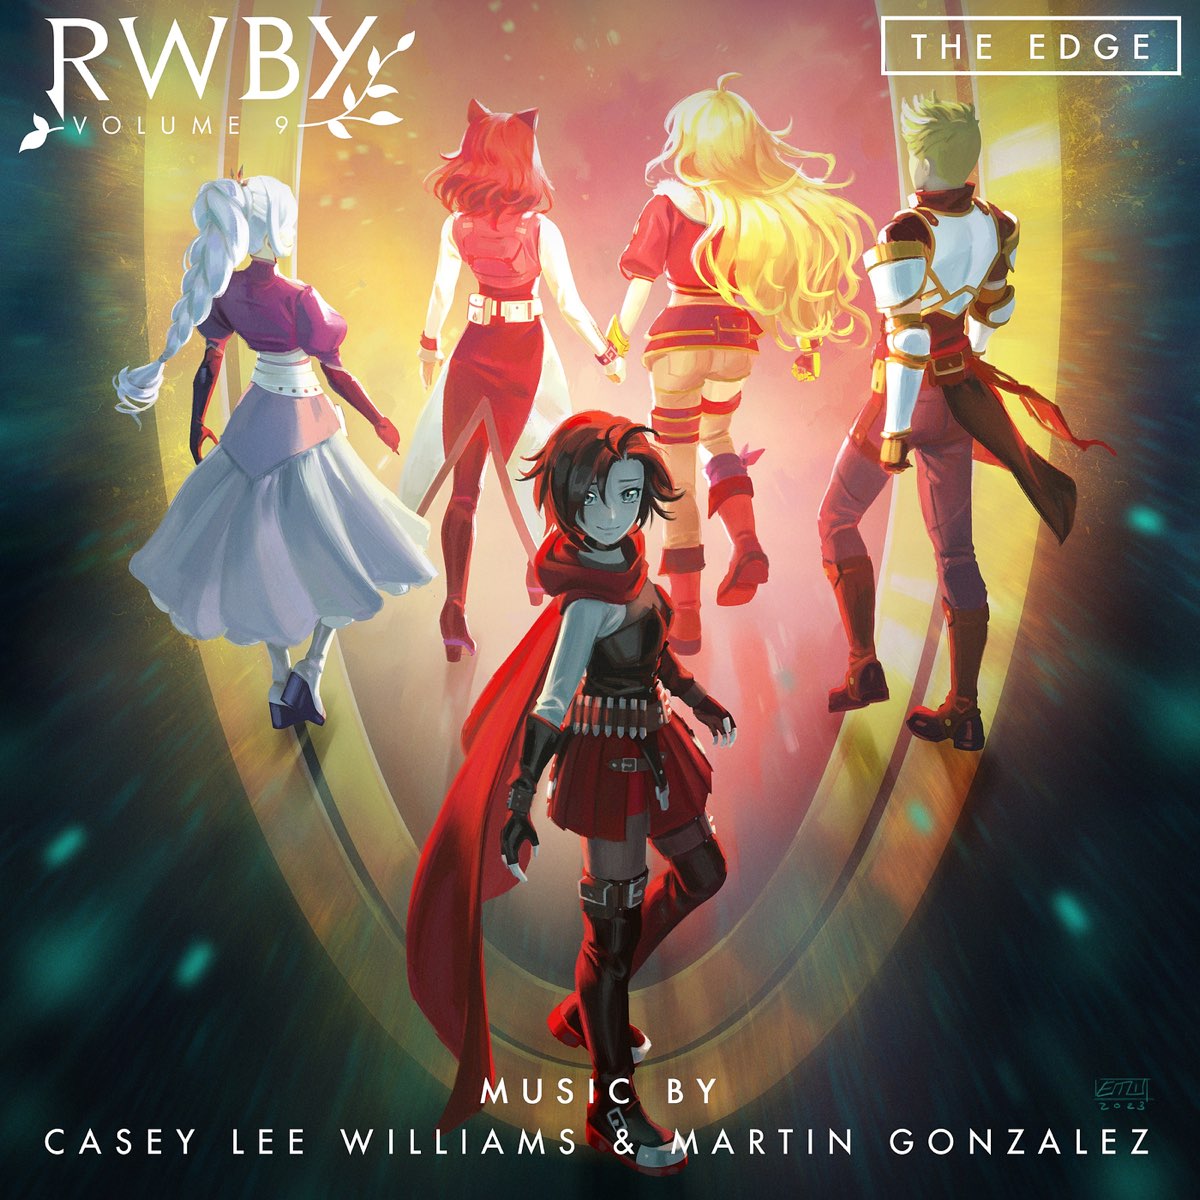 ‎the Edge Music From Rwby Vol 9 Single By Casey Lee Williams And Martin Gonzalez On Apple Music 